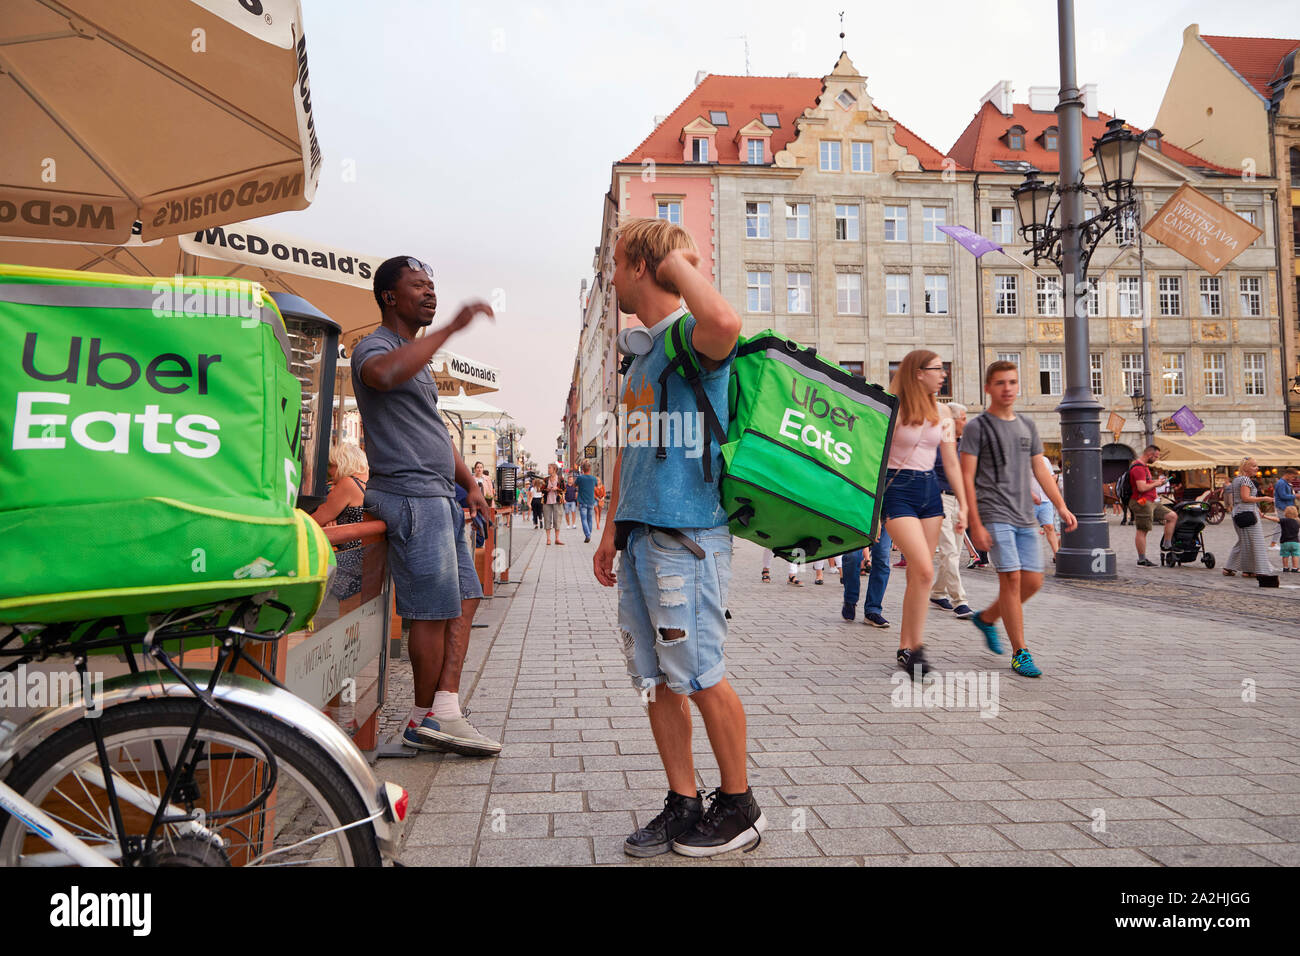 Polen Wroclaw Uber Eats driver on a bike waiting for the food talking with a colleague, a fellow worker 8-8-2019 foto Jaco Klamer Stock Photo